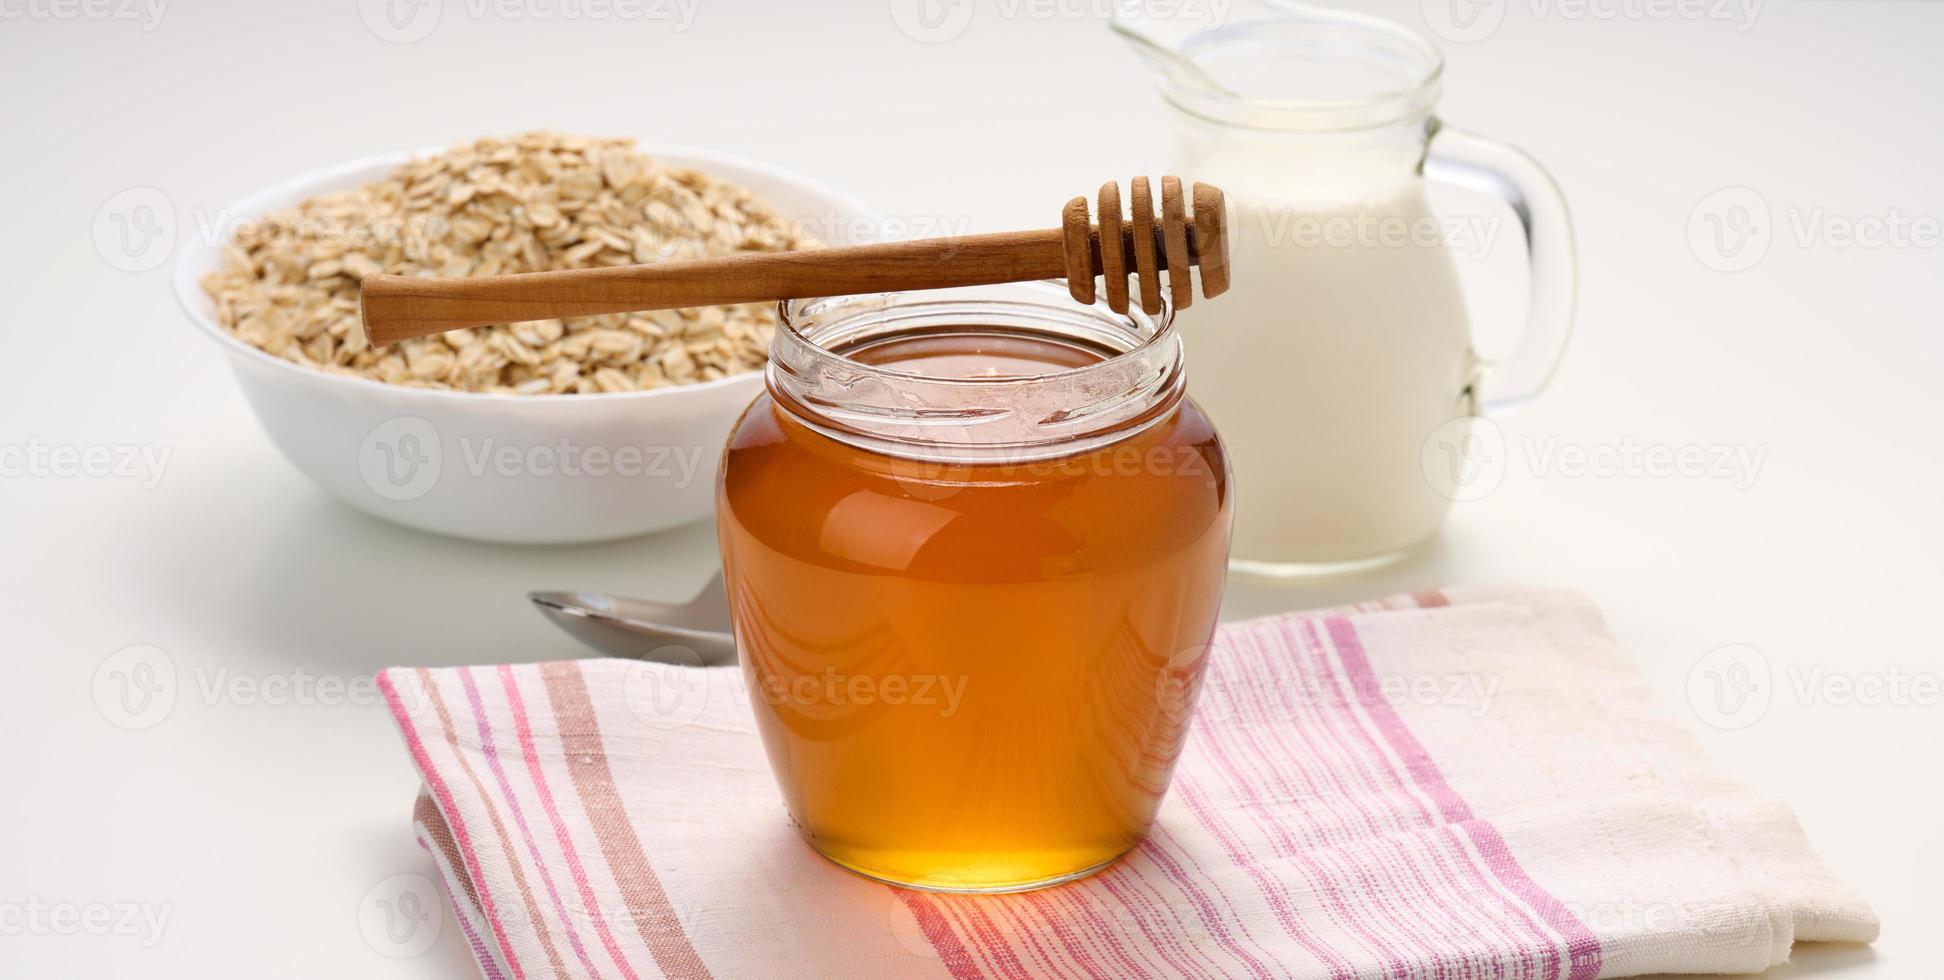 honey in a glass transparent jar and a wooden stick on a white table, behind a decanter with milk photo